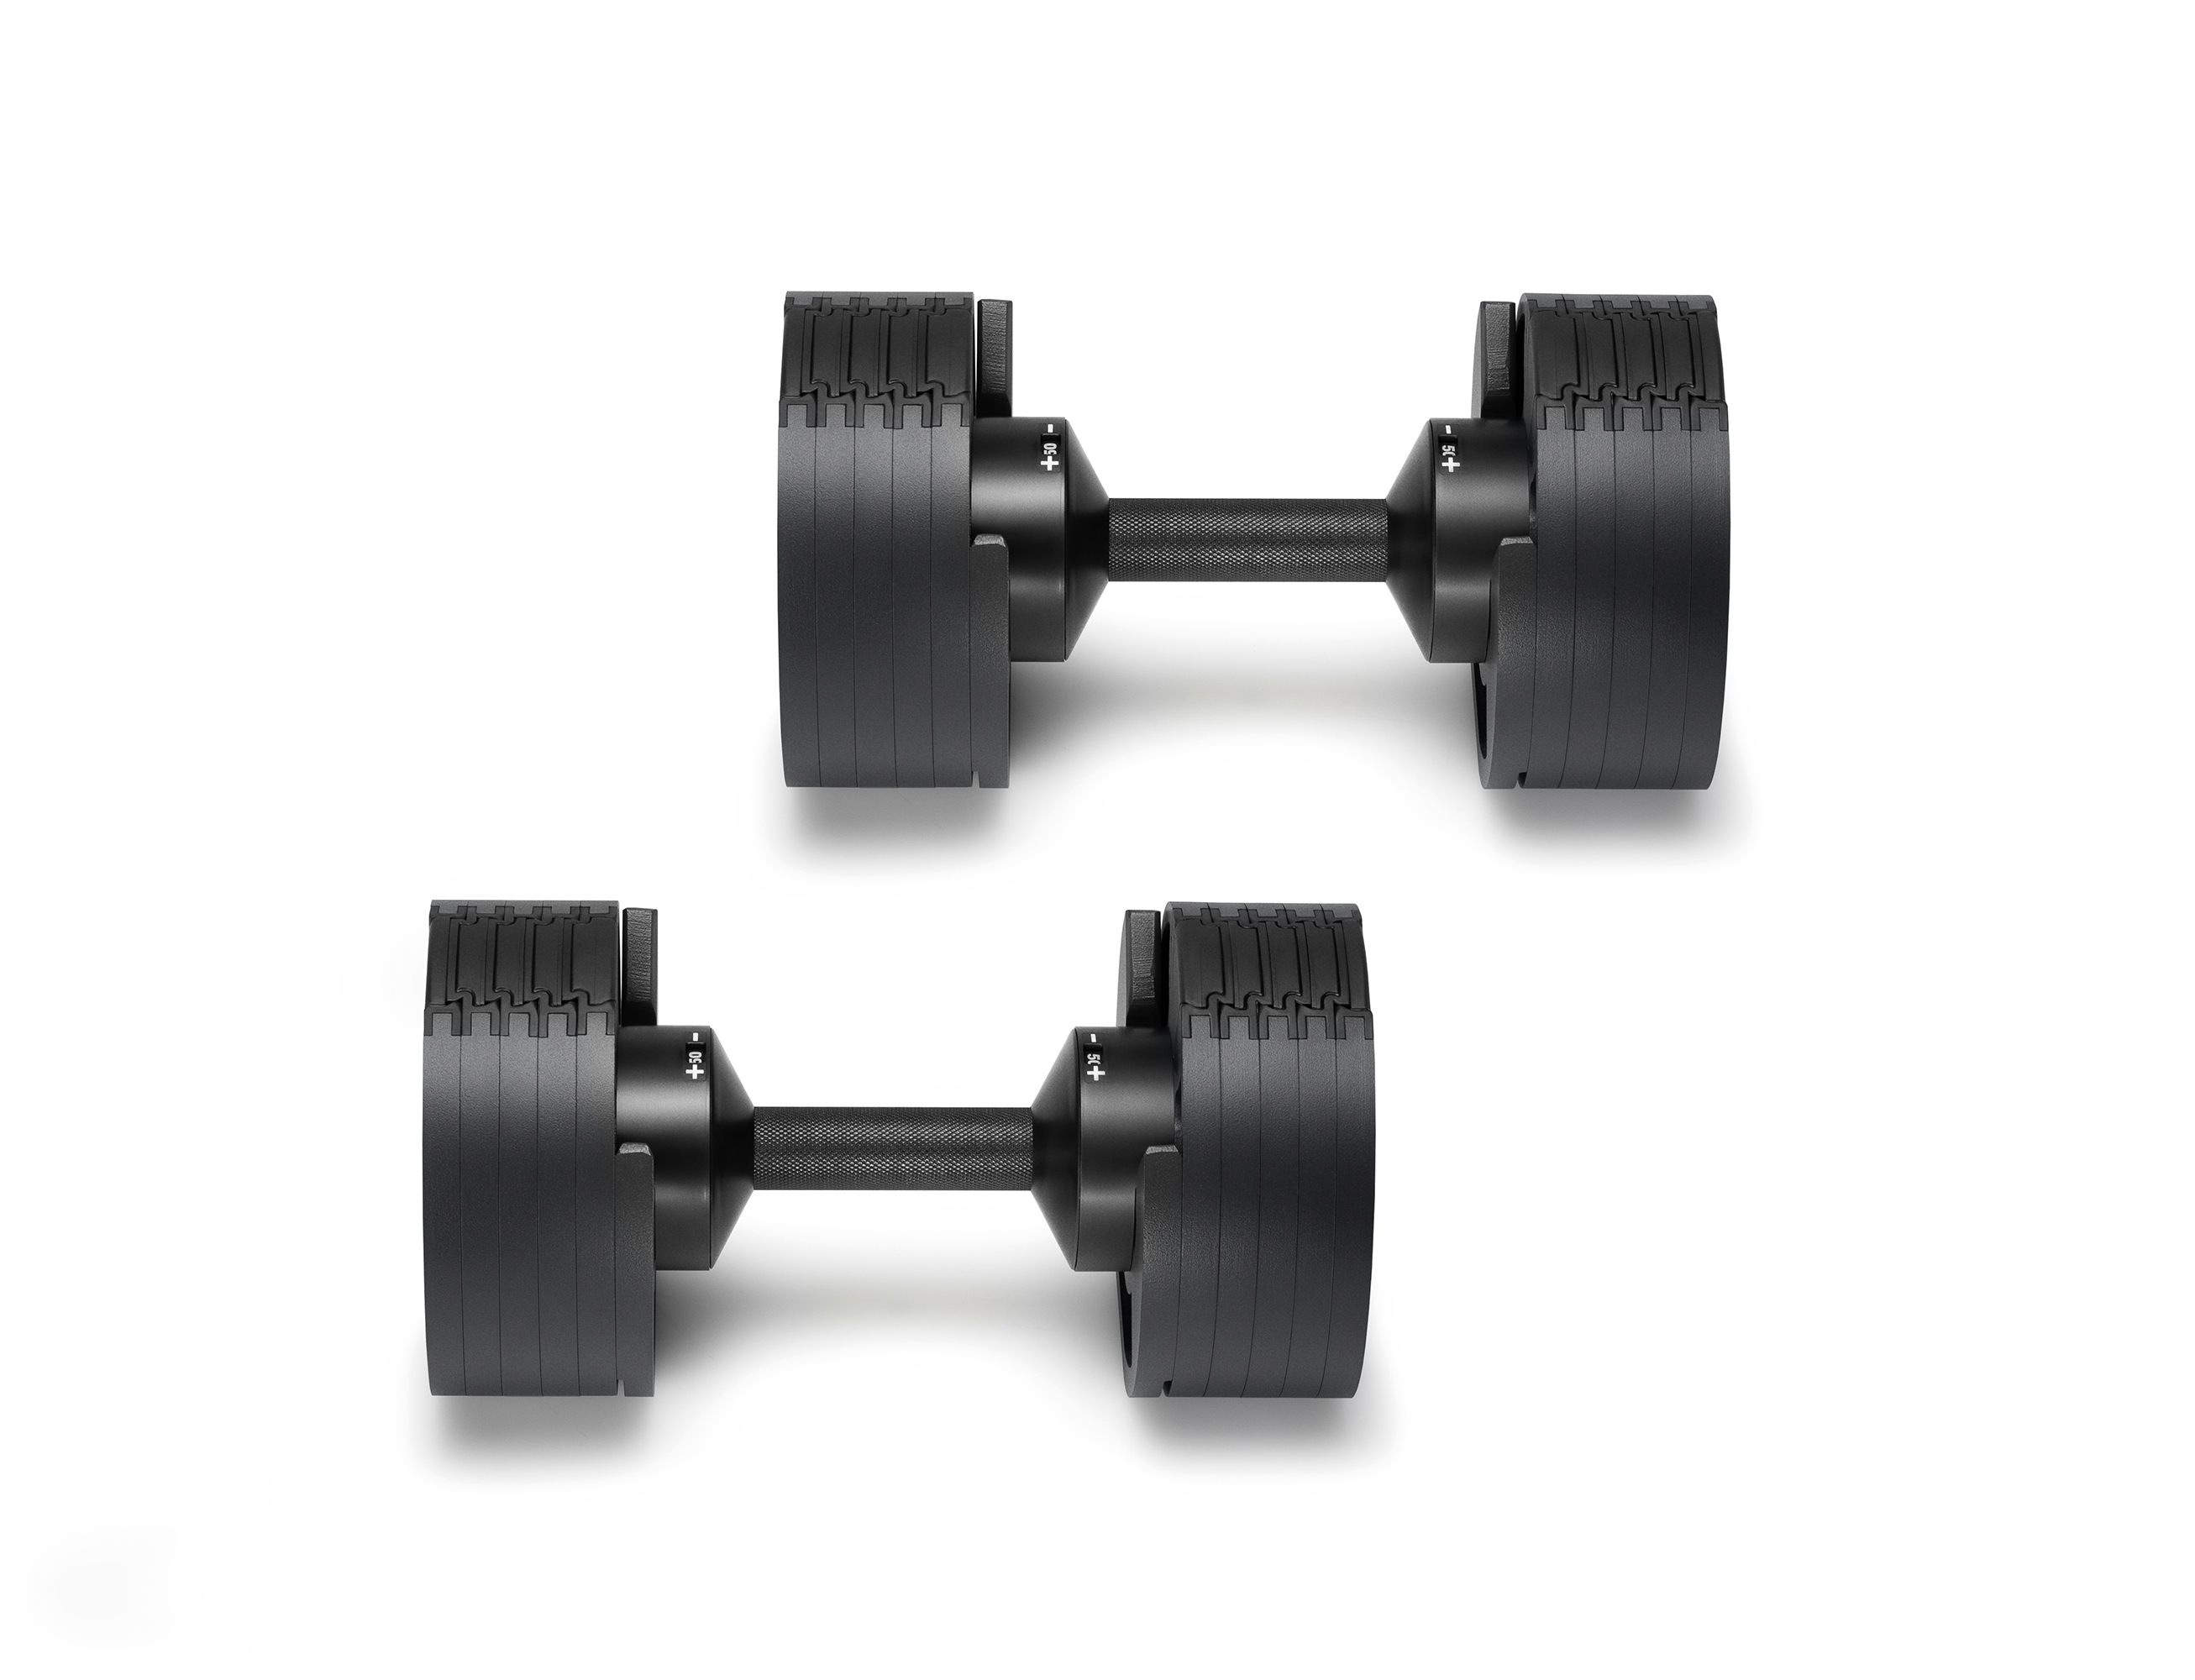 Look the New Matte Black 50 lb Dumbbell Created By SMRTFT